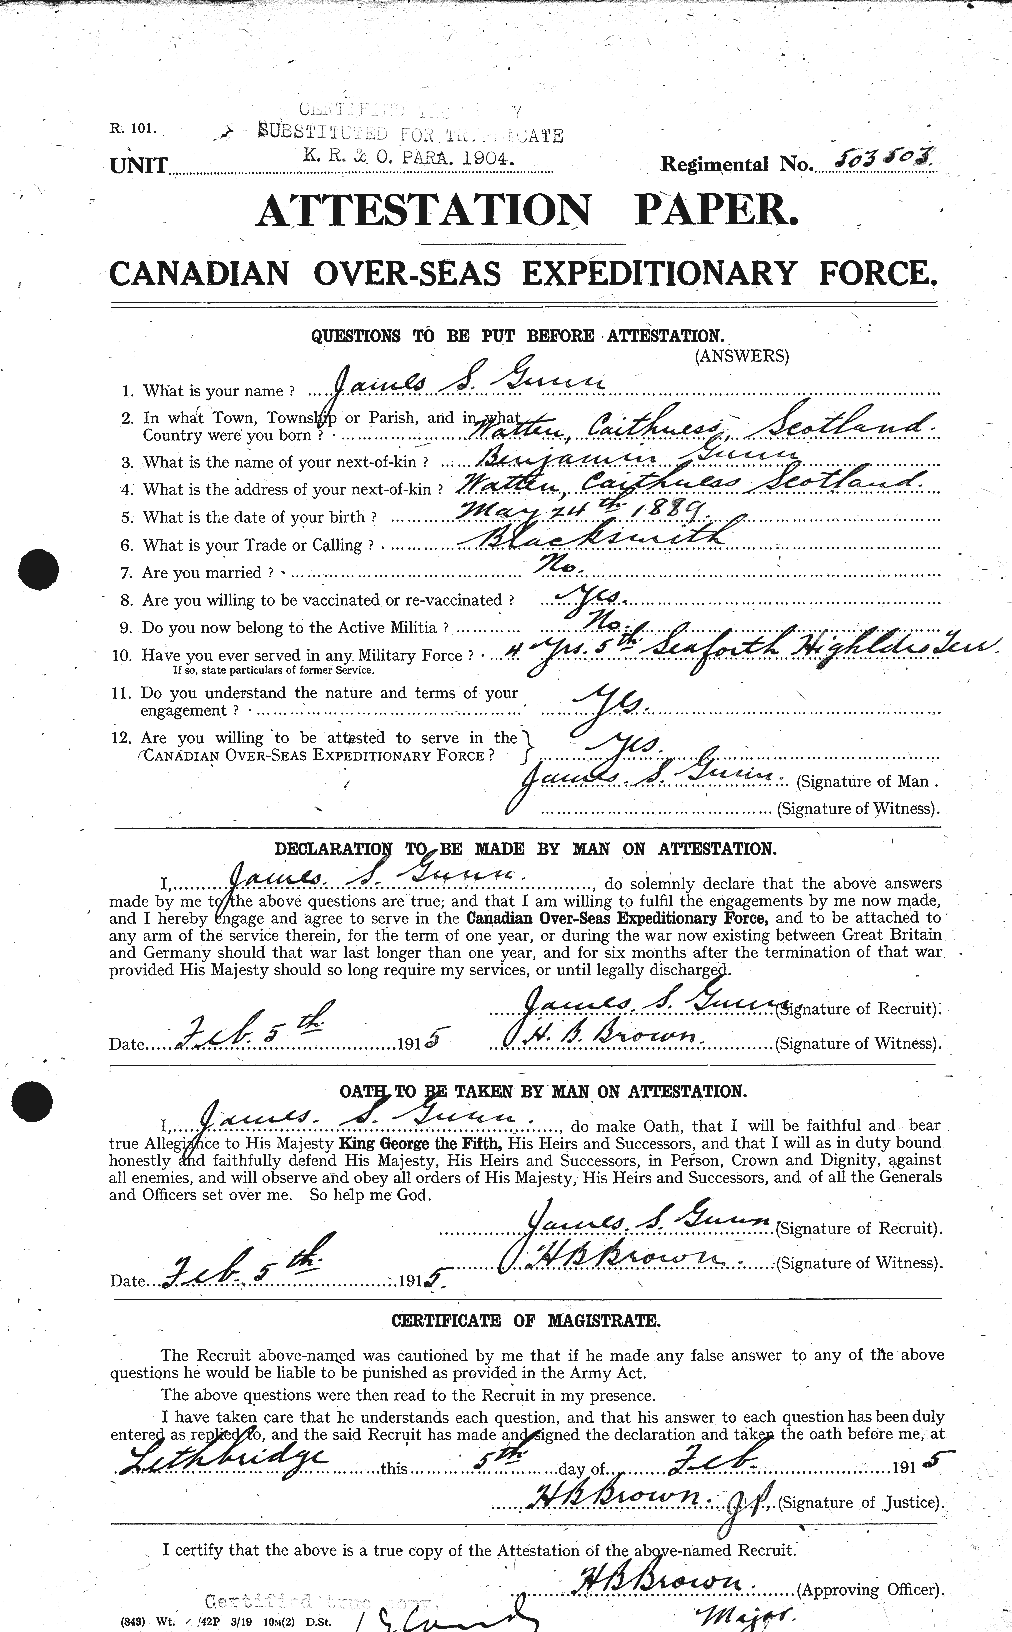 Personnel Records of the First World War - CEF 369278a